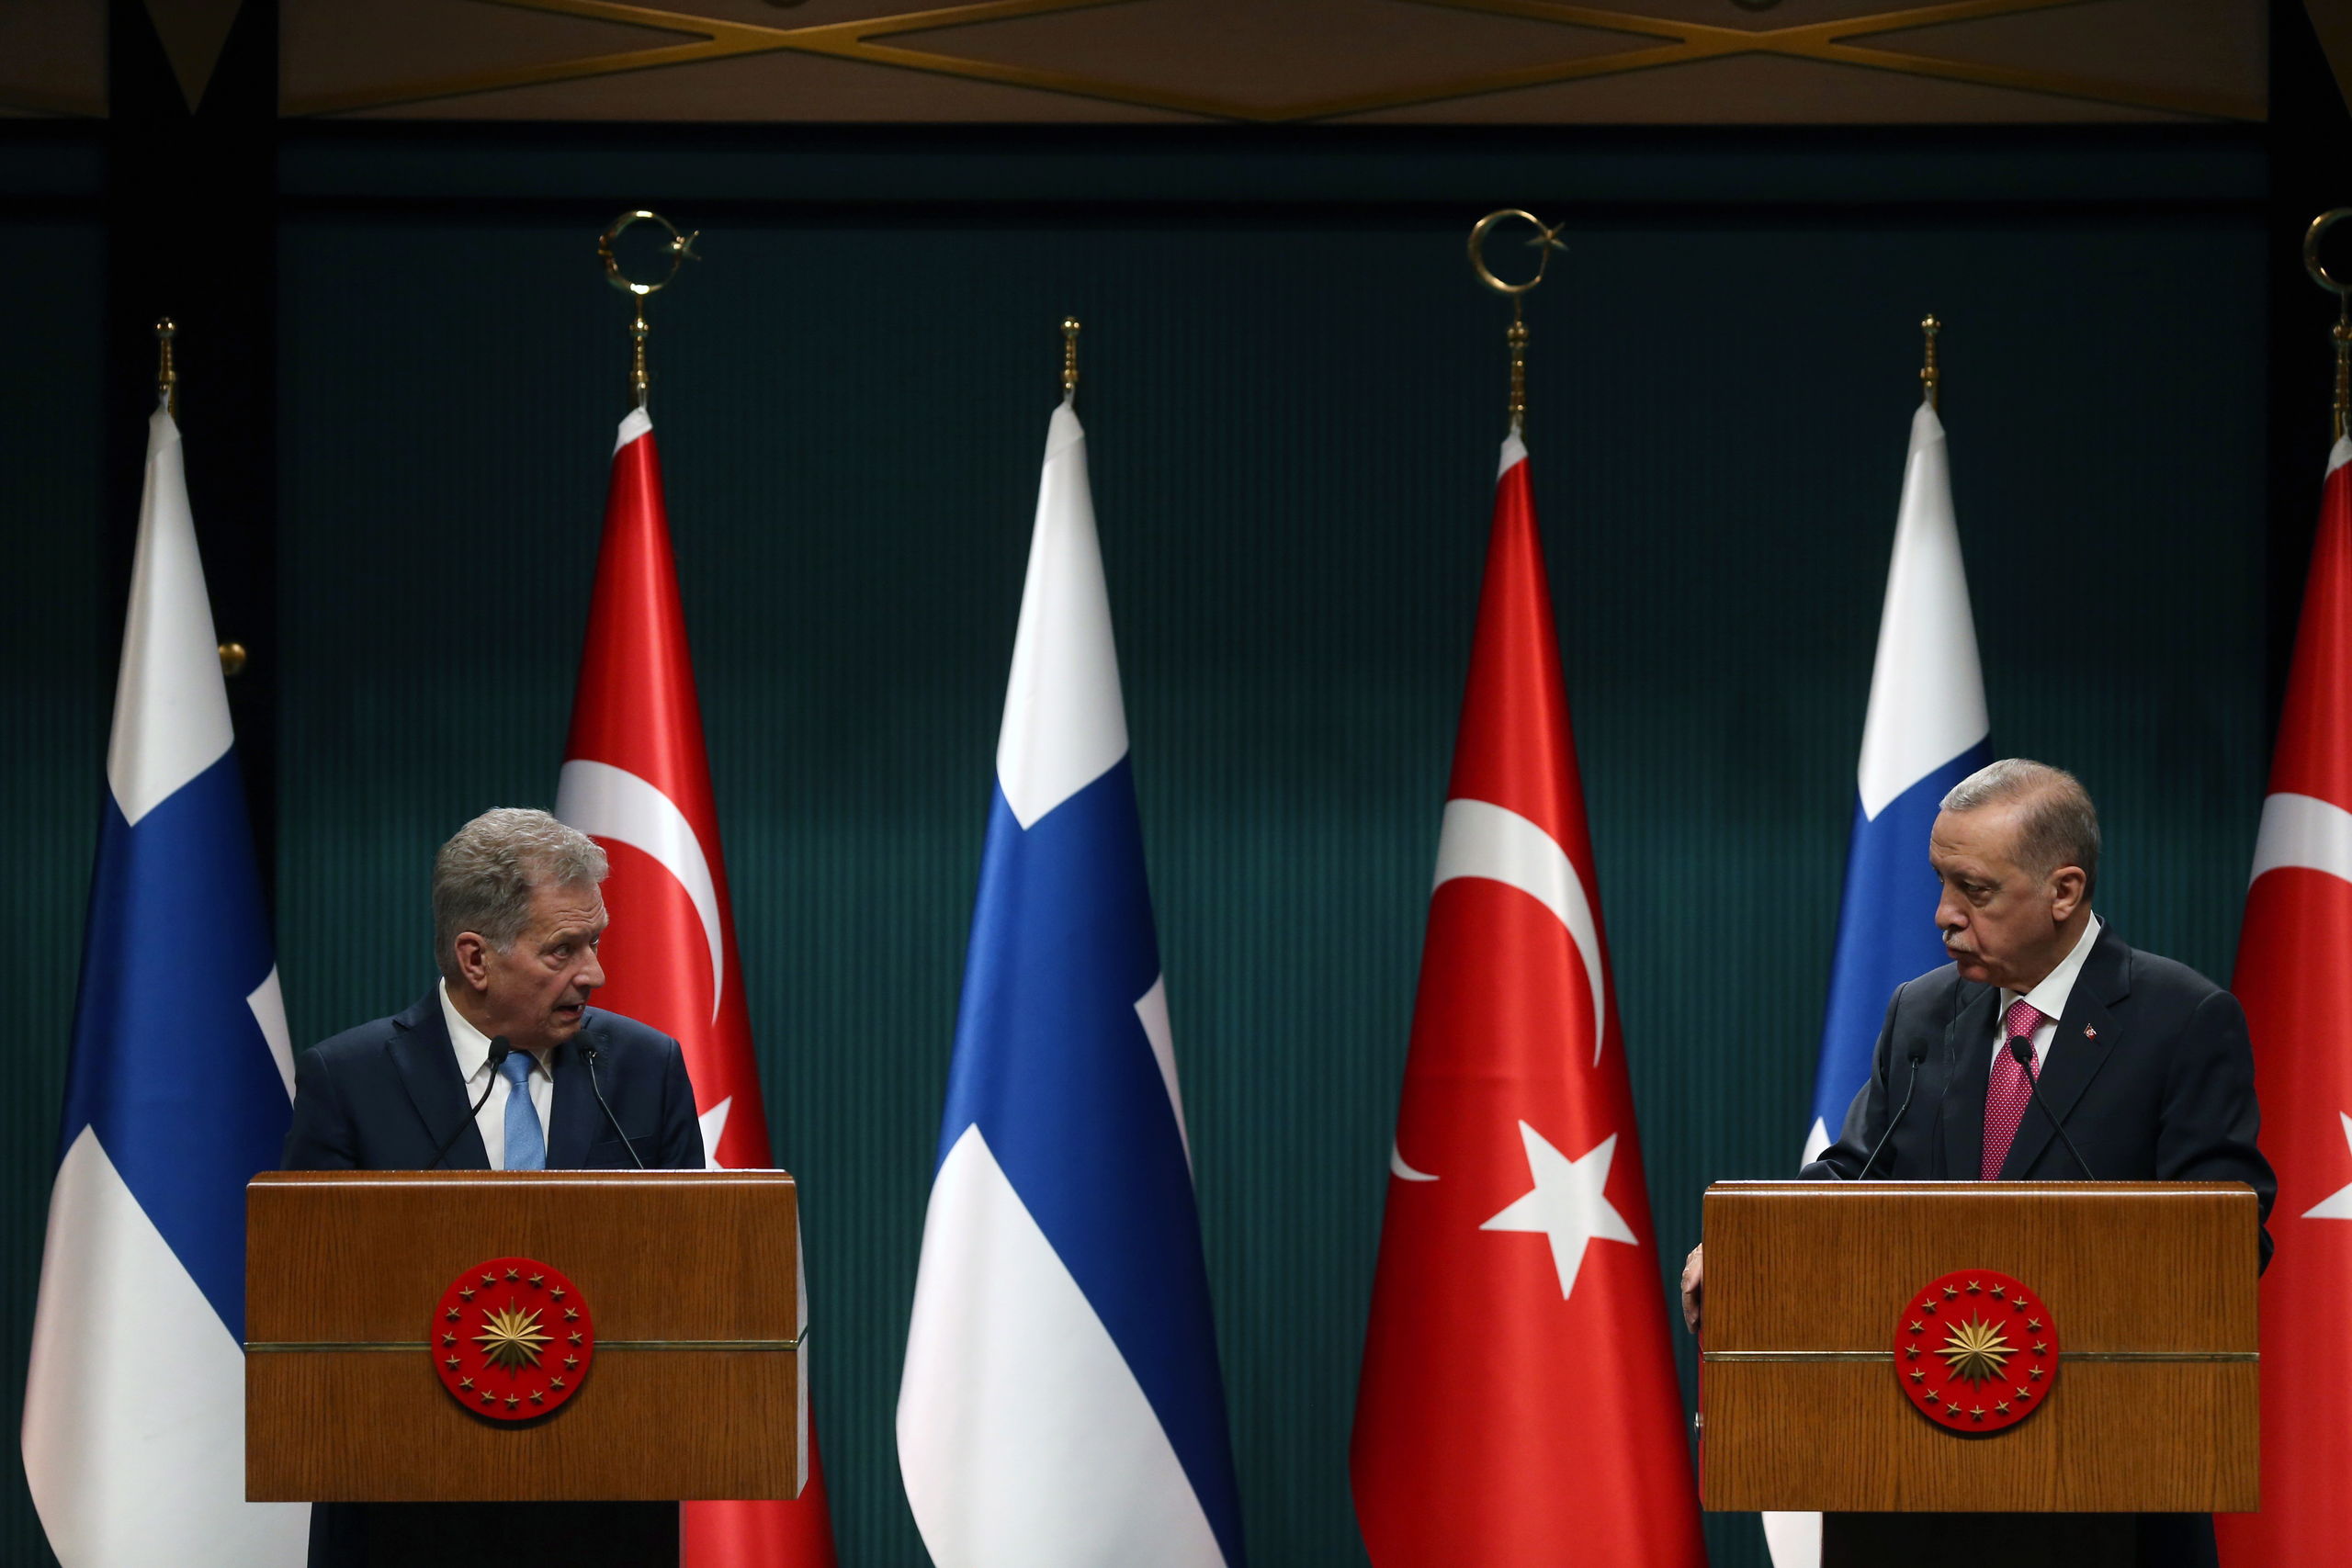 Turkey and Hungary open the NATO door to Finland, but insist on leaving Sweden out